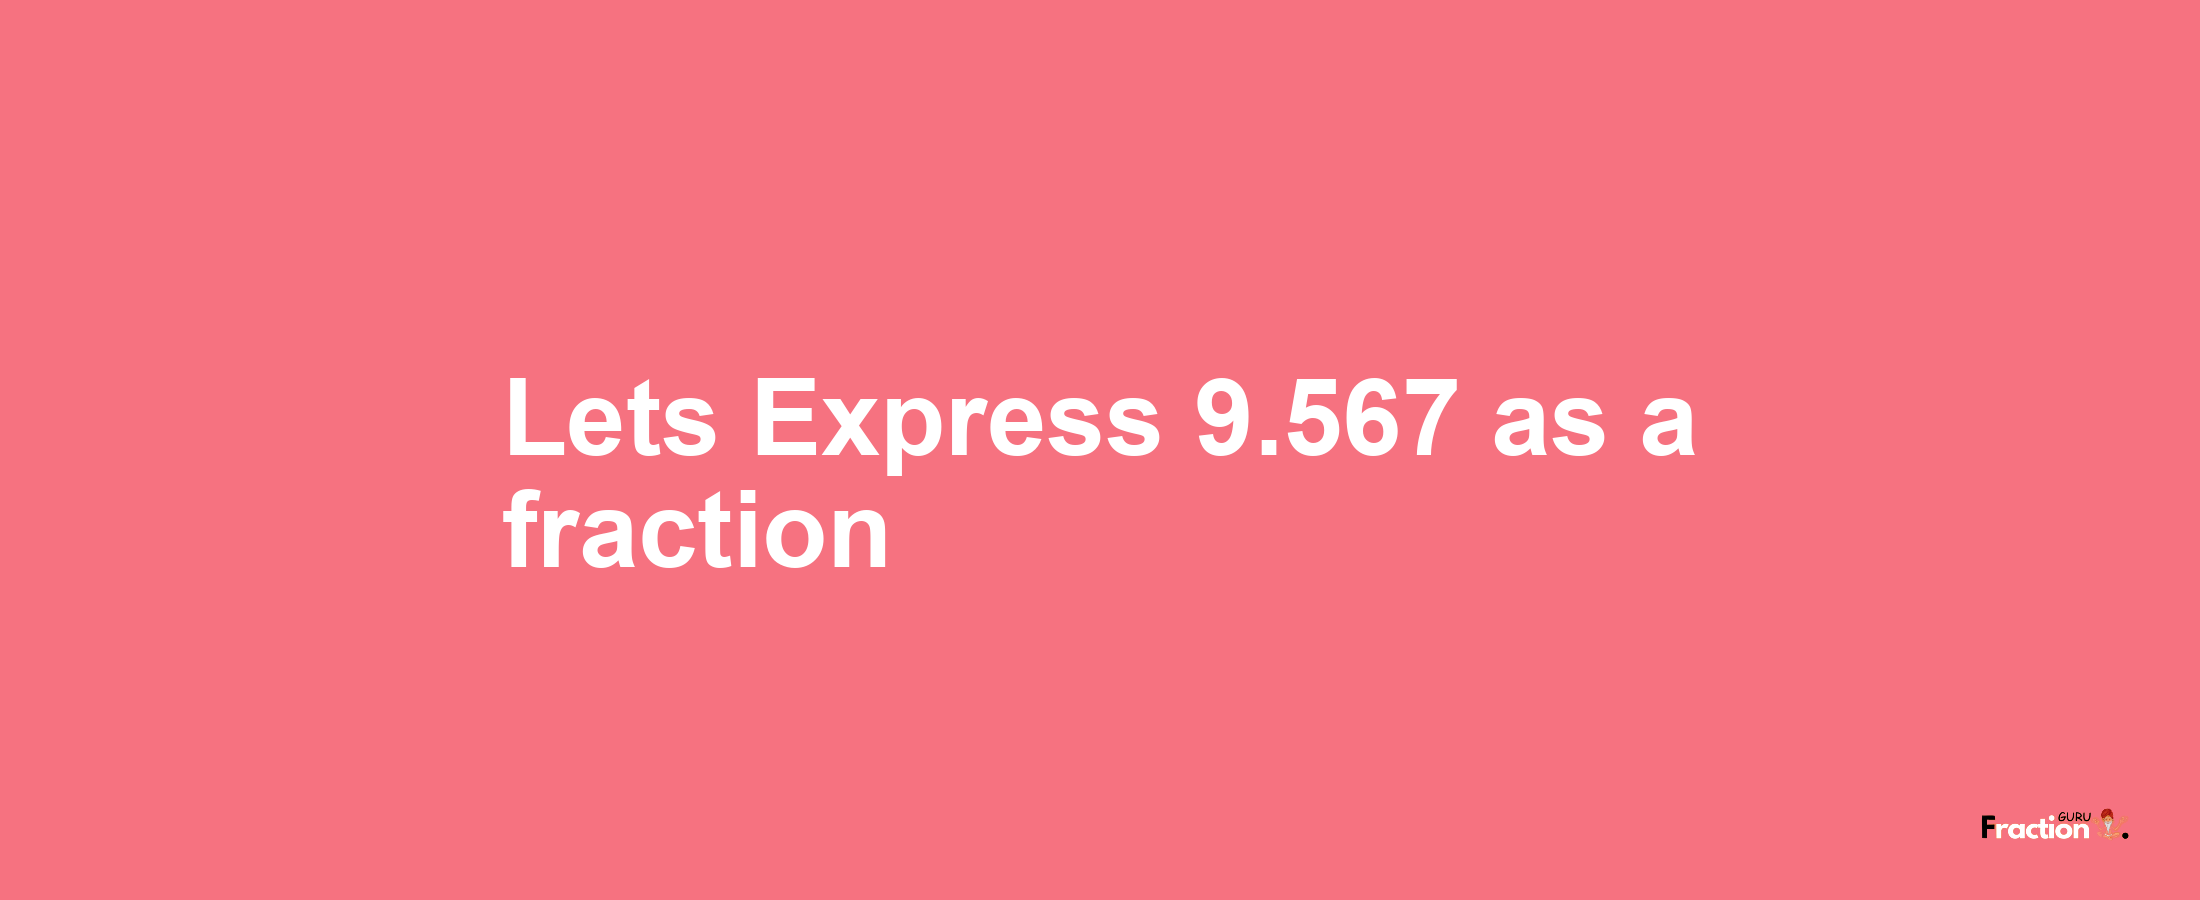 Lets Express 9.567 as afraction